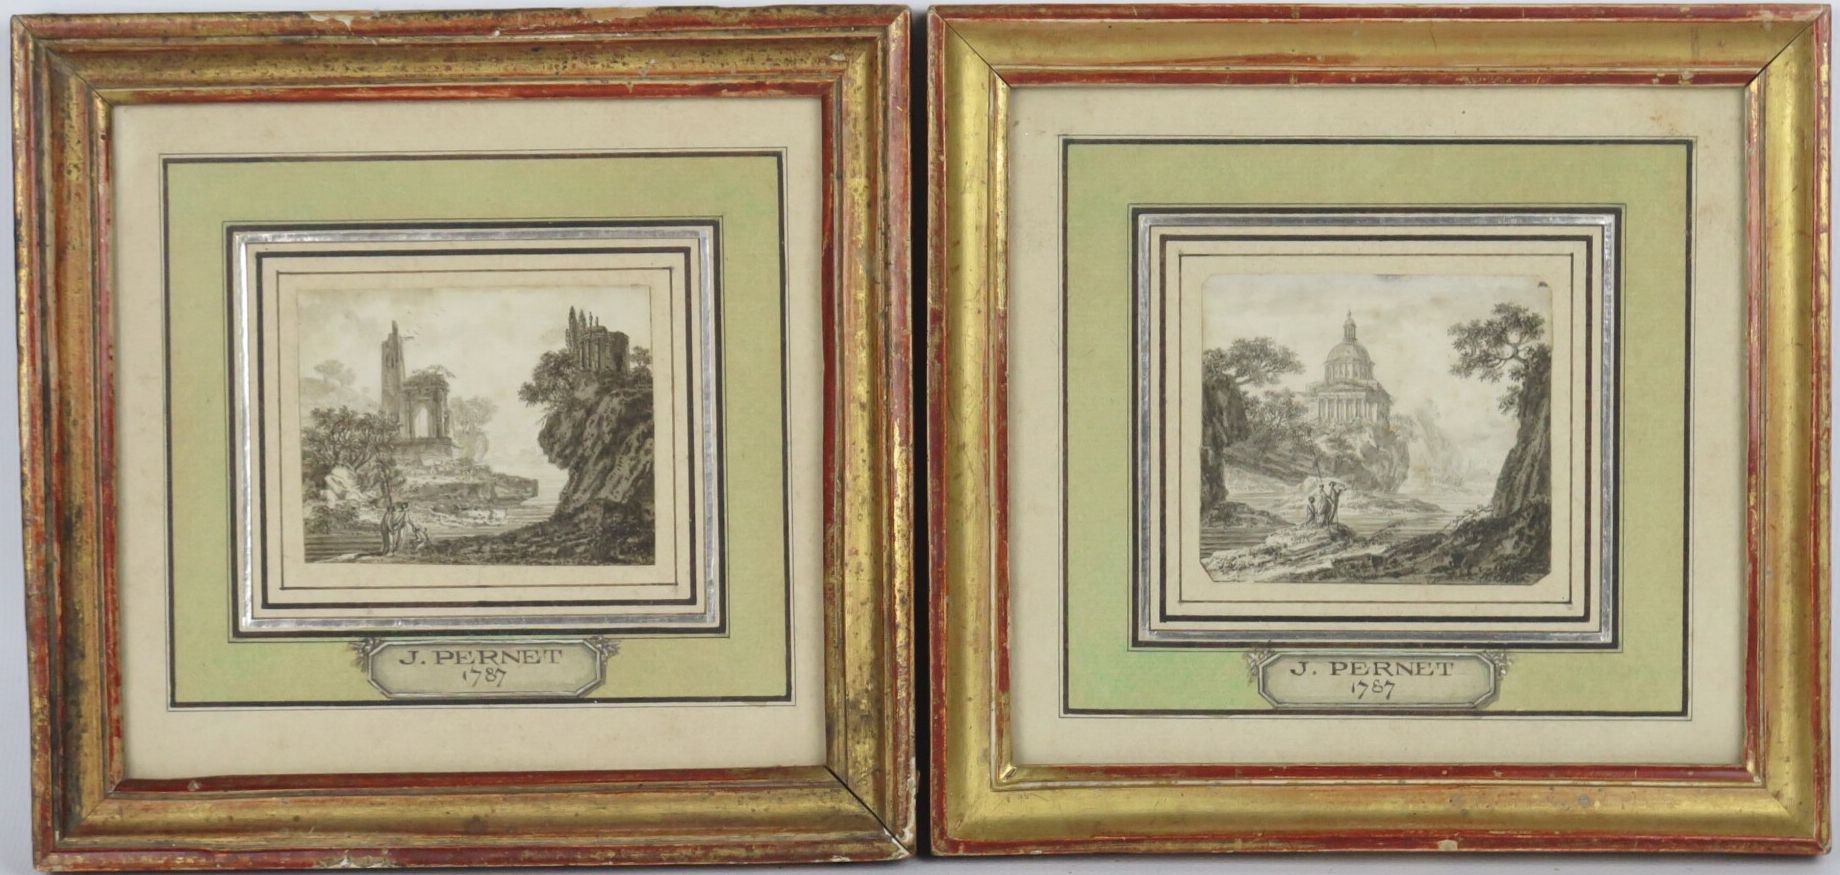 Null French school of the XVIIIth century.

Pair of animated antique landscapes.&hellip;